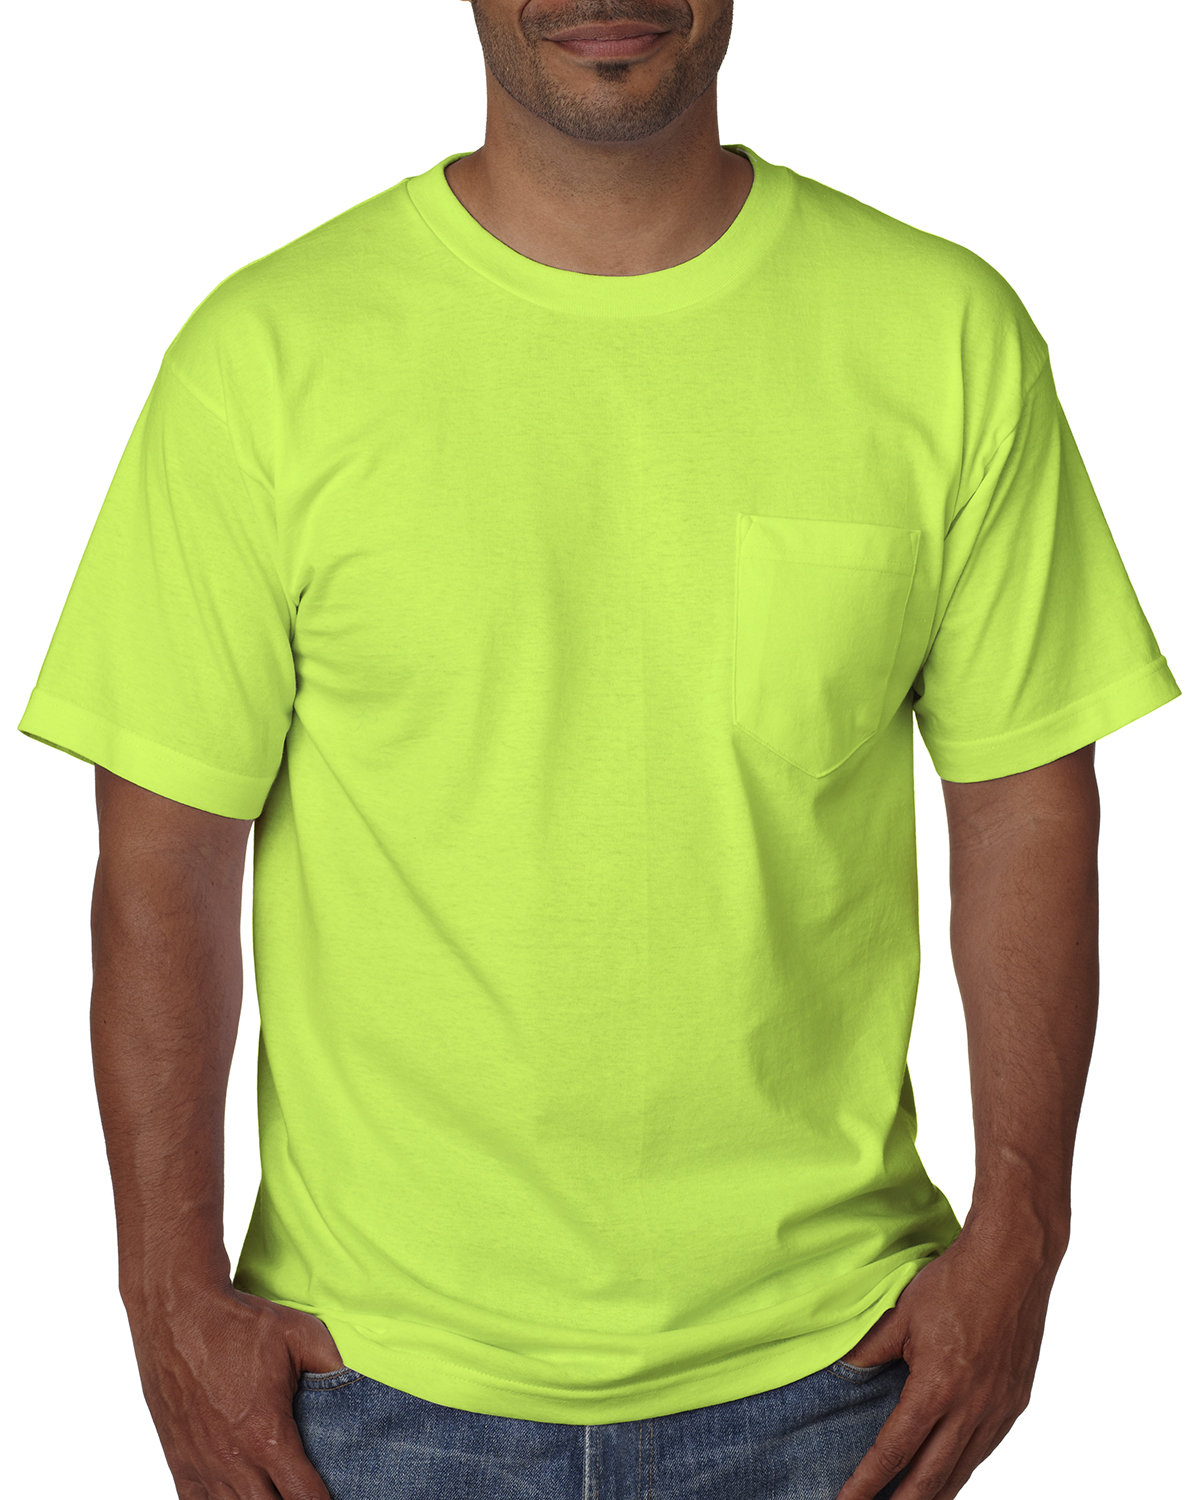 Bayside Adult Short-Sleeve T-Shirt with Pocket LIME GREEN 